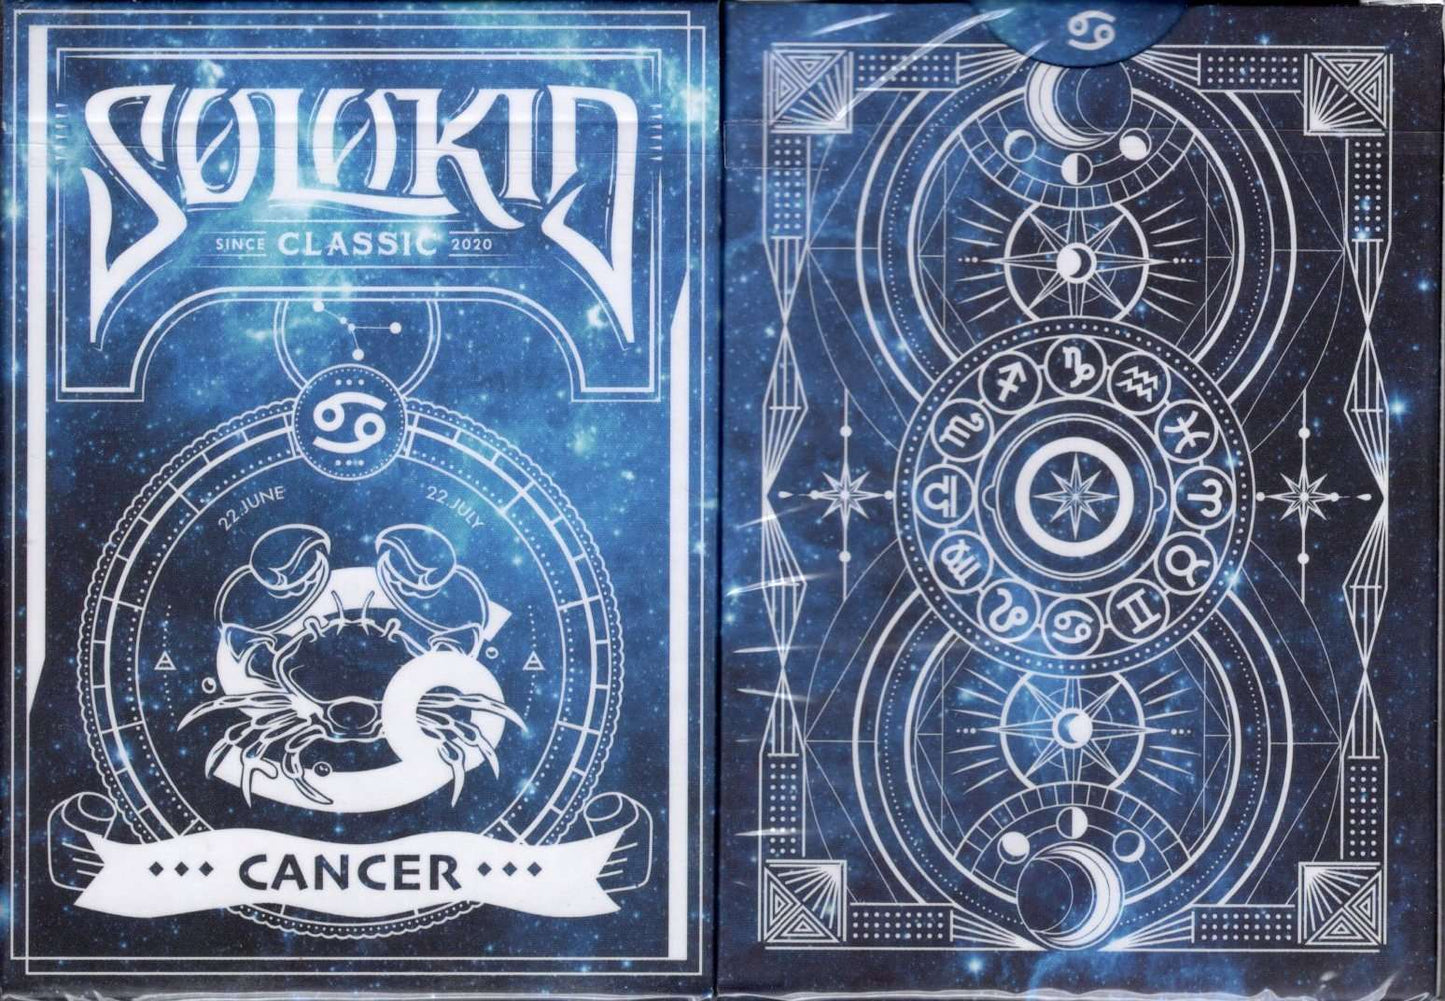 PlayingCardDecks.com-Solokid Constellation Series v2 Cancer Playing Cards MPC